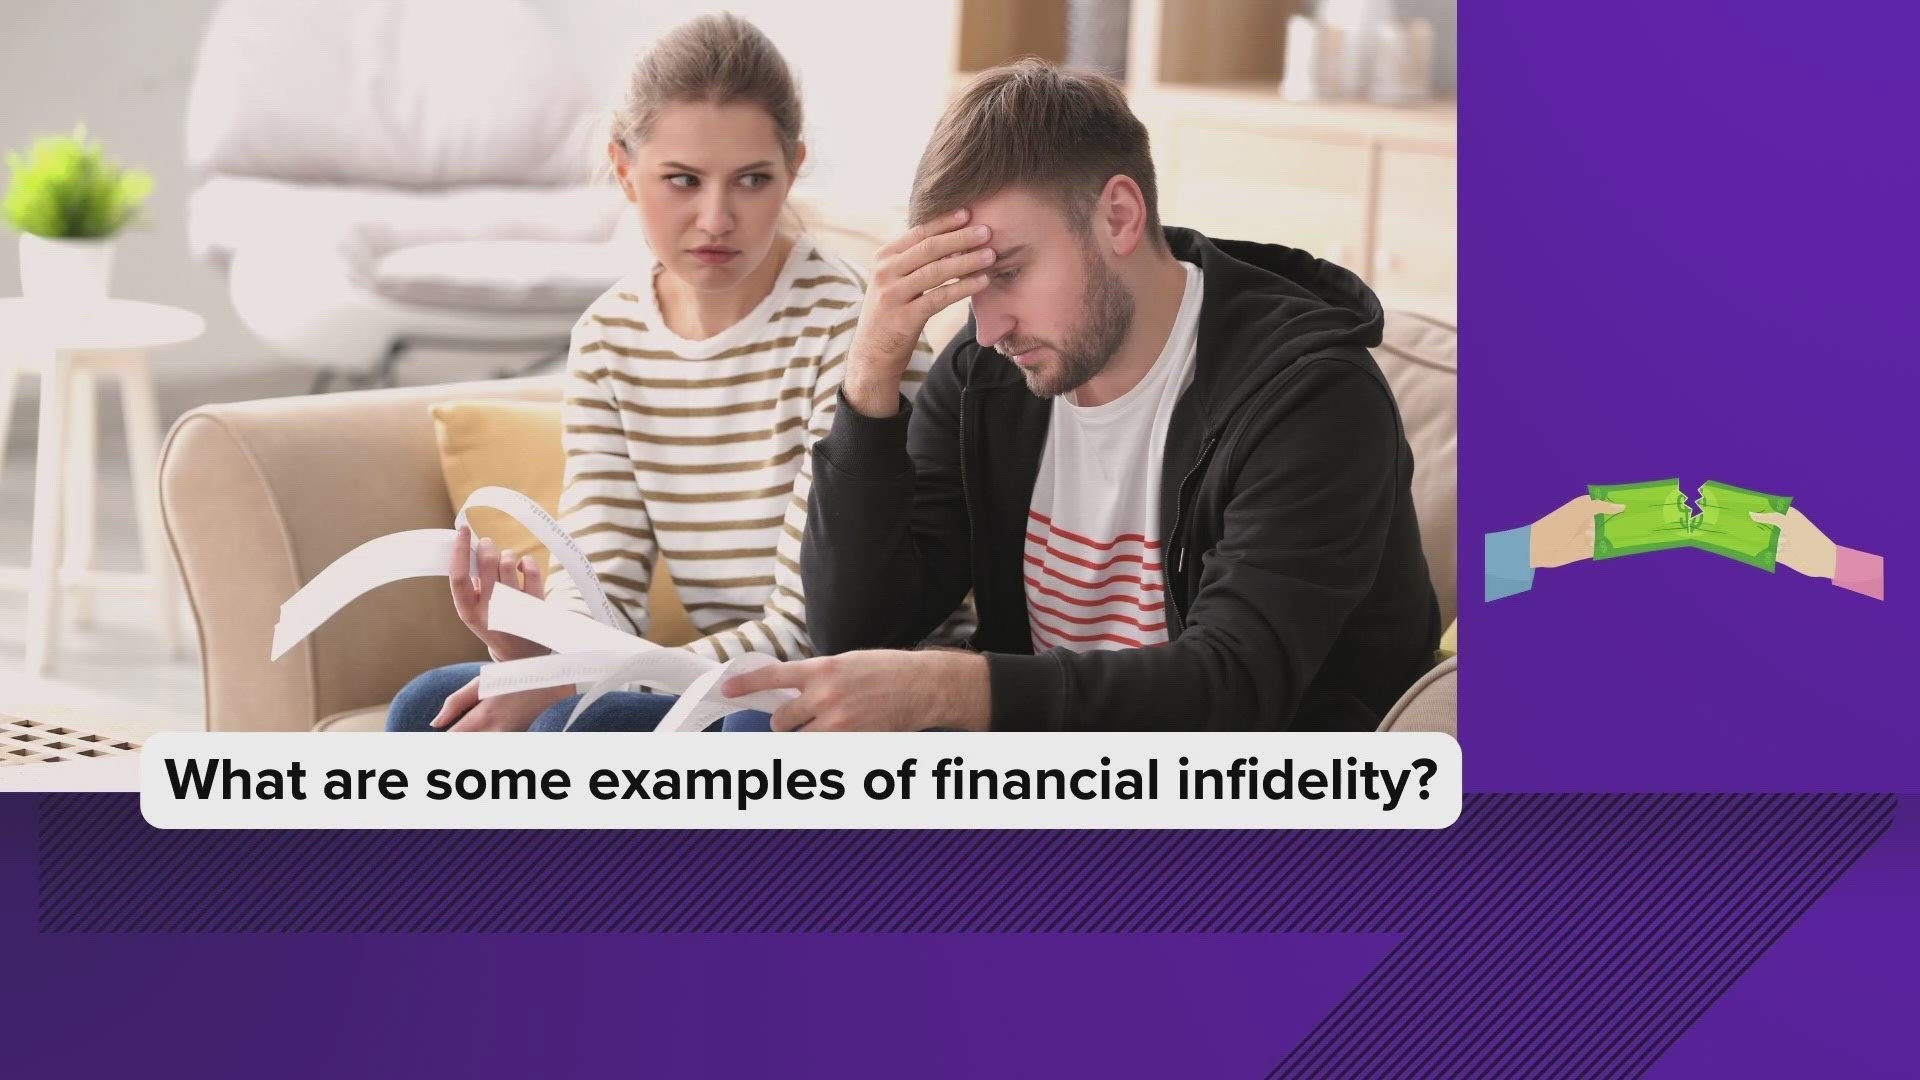 A reported 1 in 3 Americans admit to lying to their partners about money.